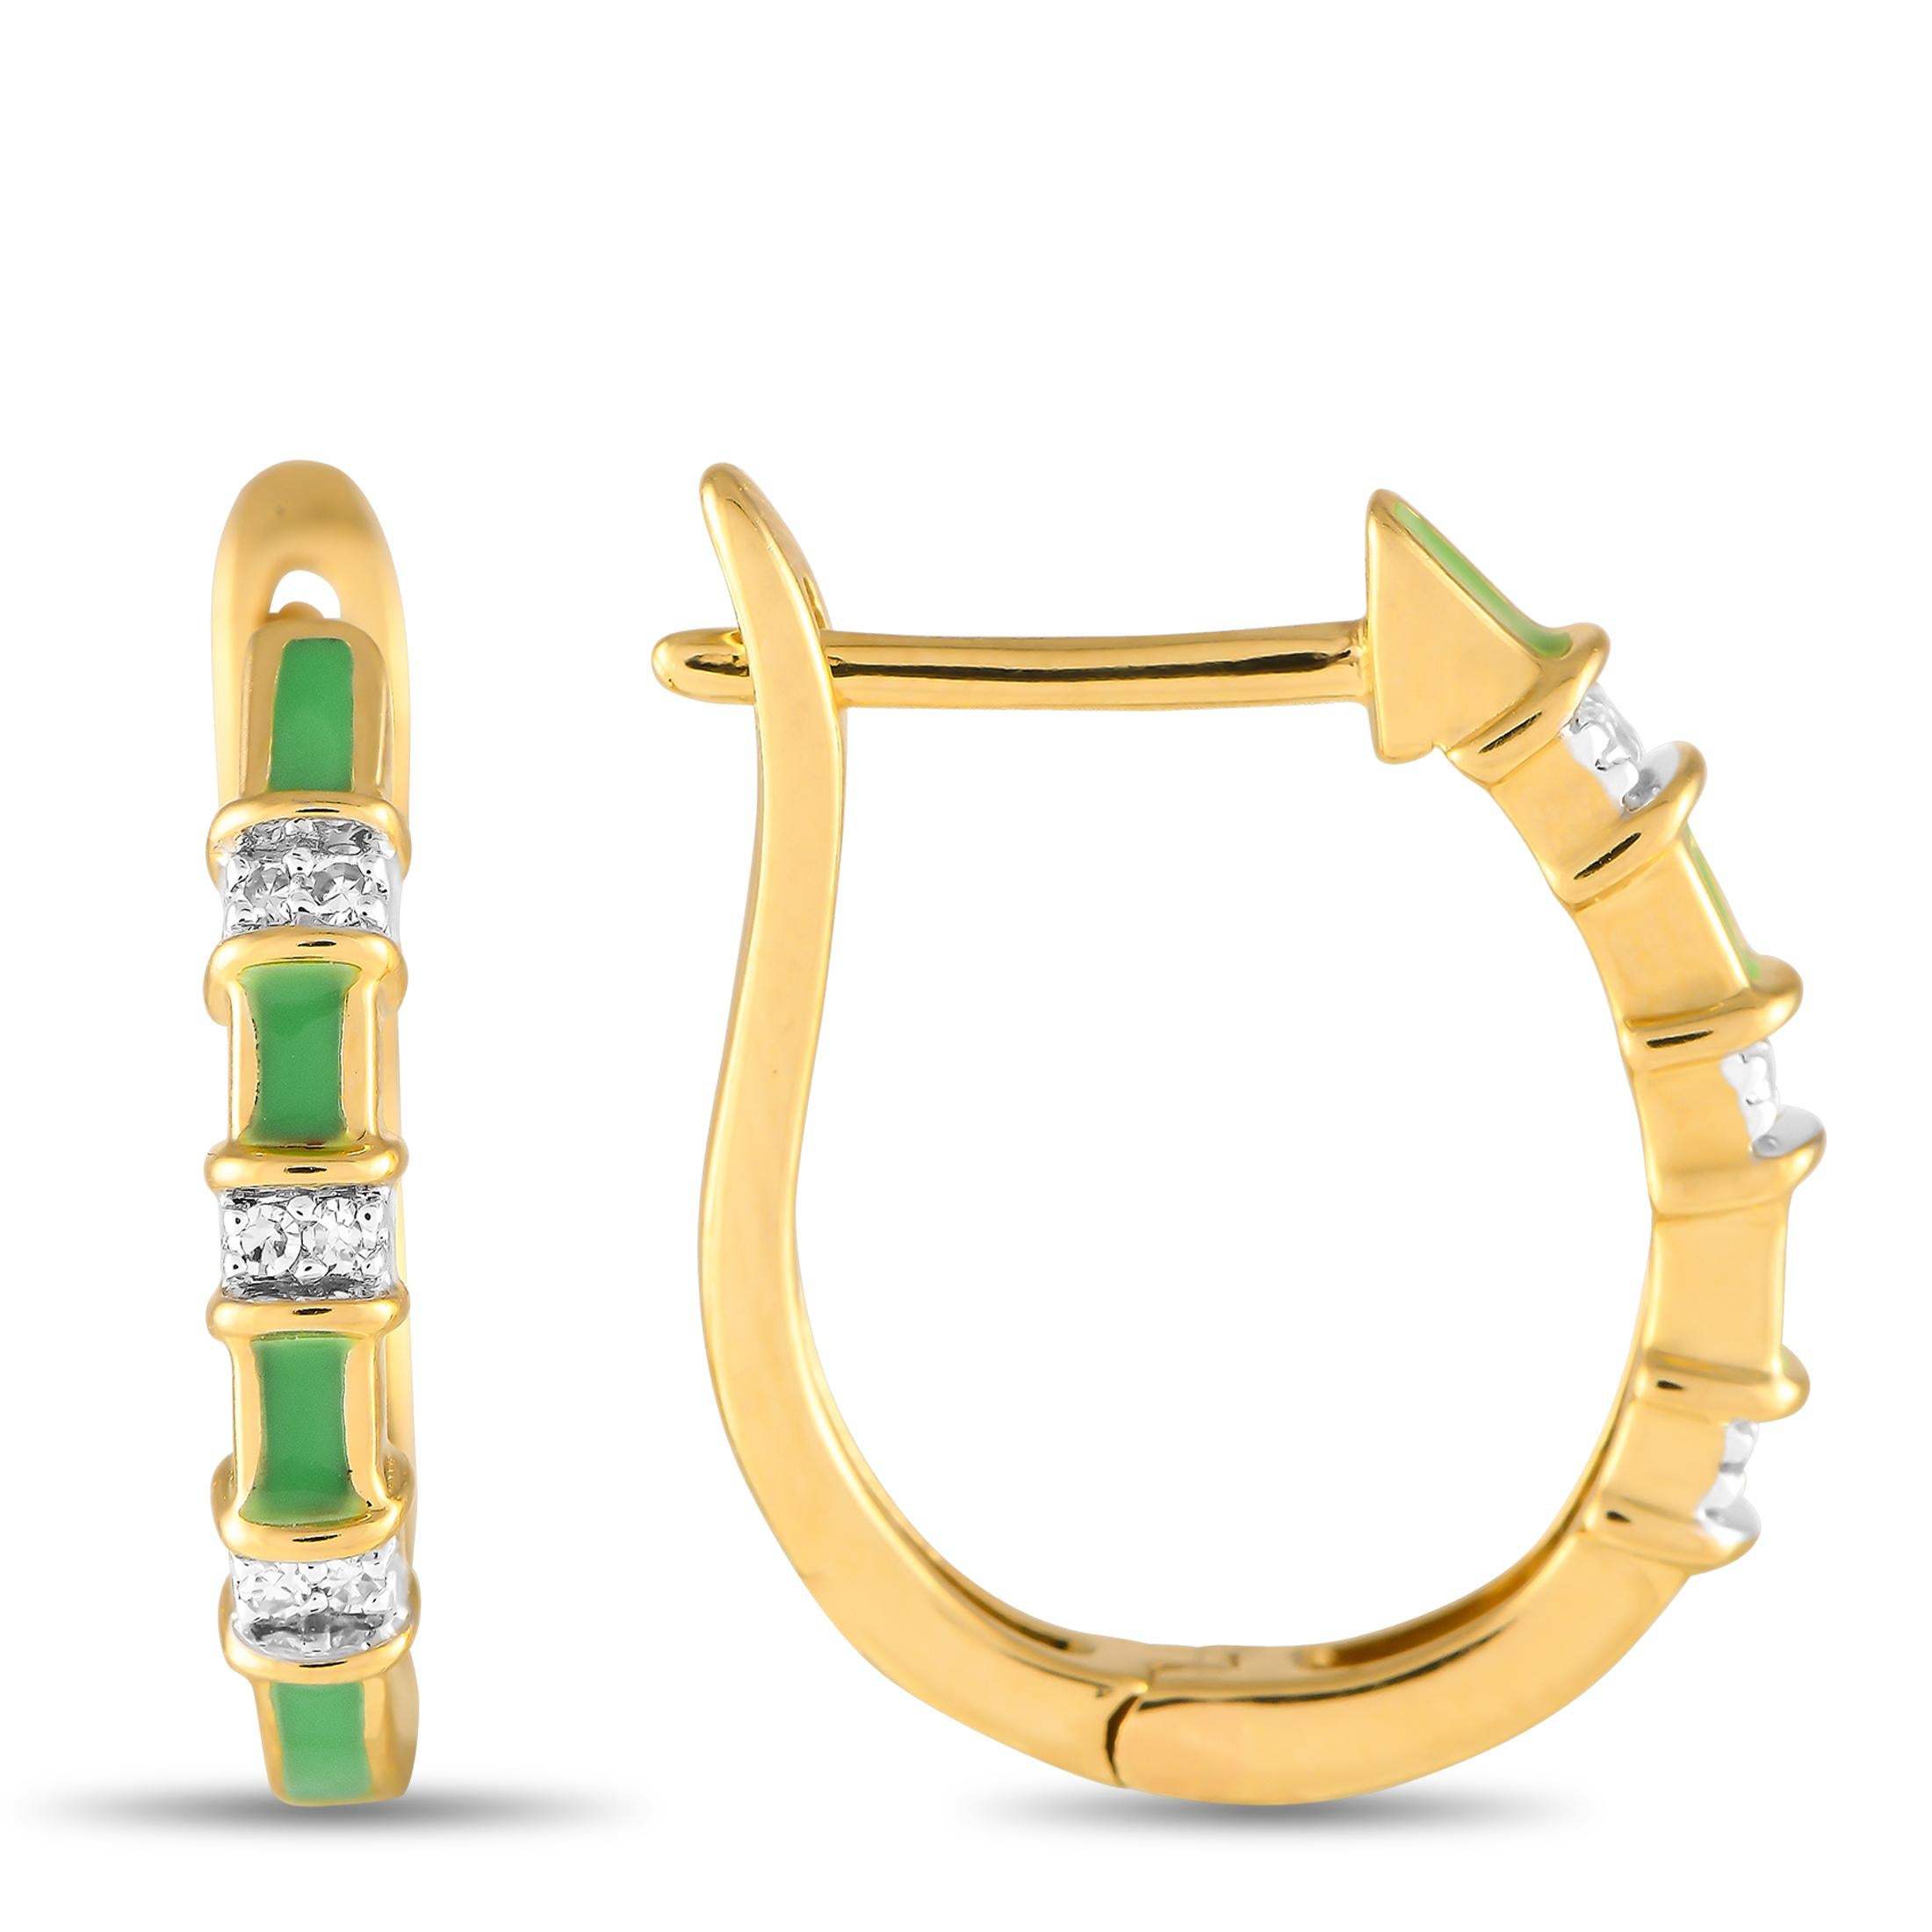 Add textured style to your looks with this pair of bamboo-inspired huggies. These earrings come with grooved panels and are finished with green enamel and diamond collars. The earrings are fastened by a hinged snap closure.This brand new pair of LB